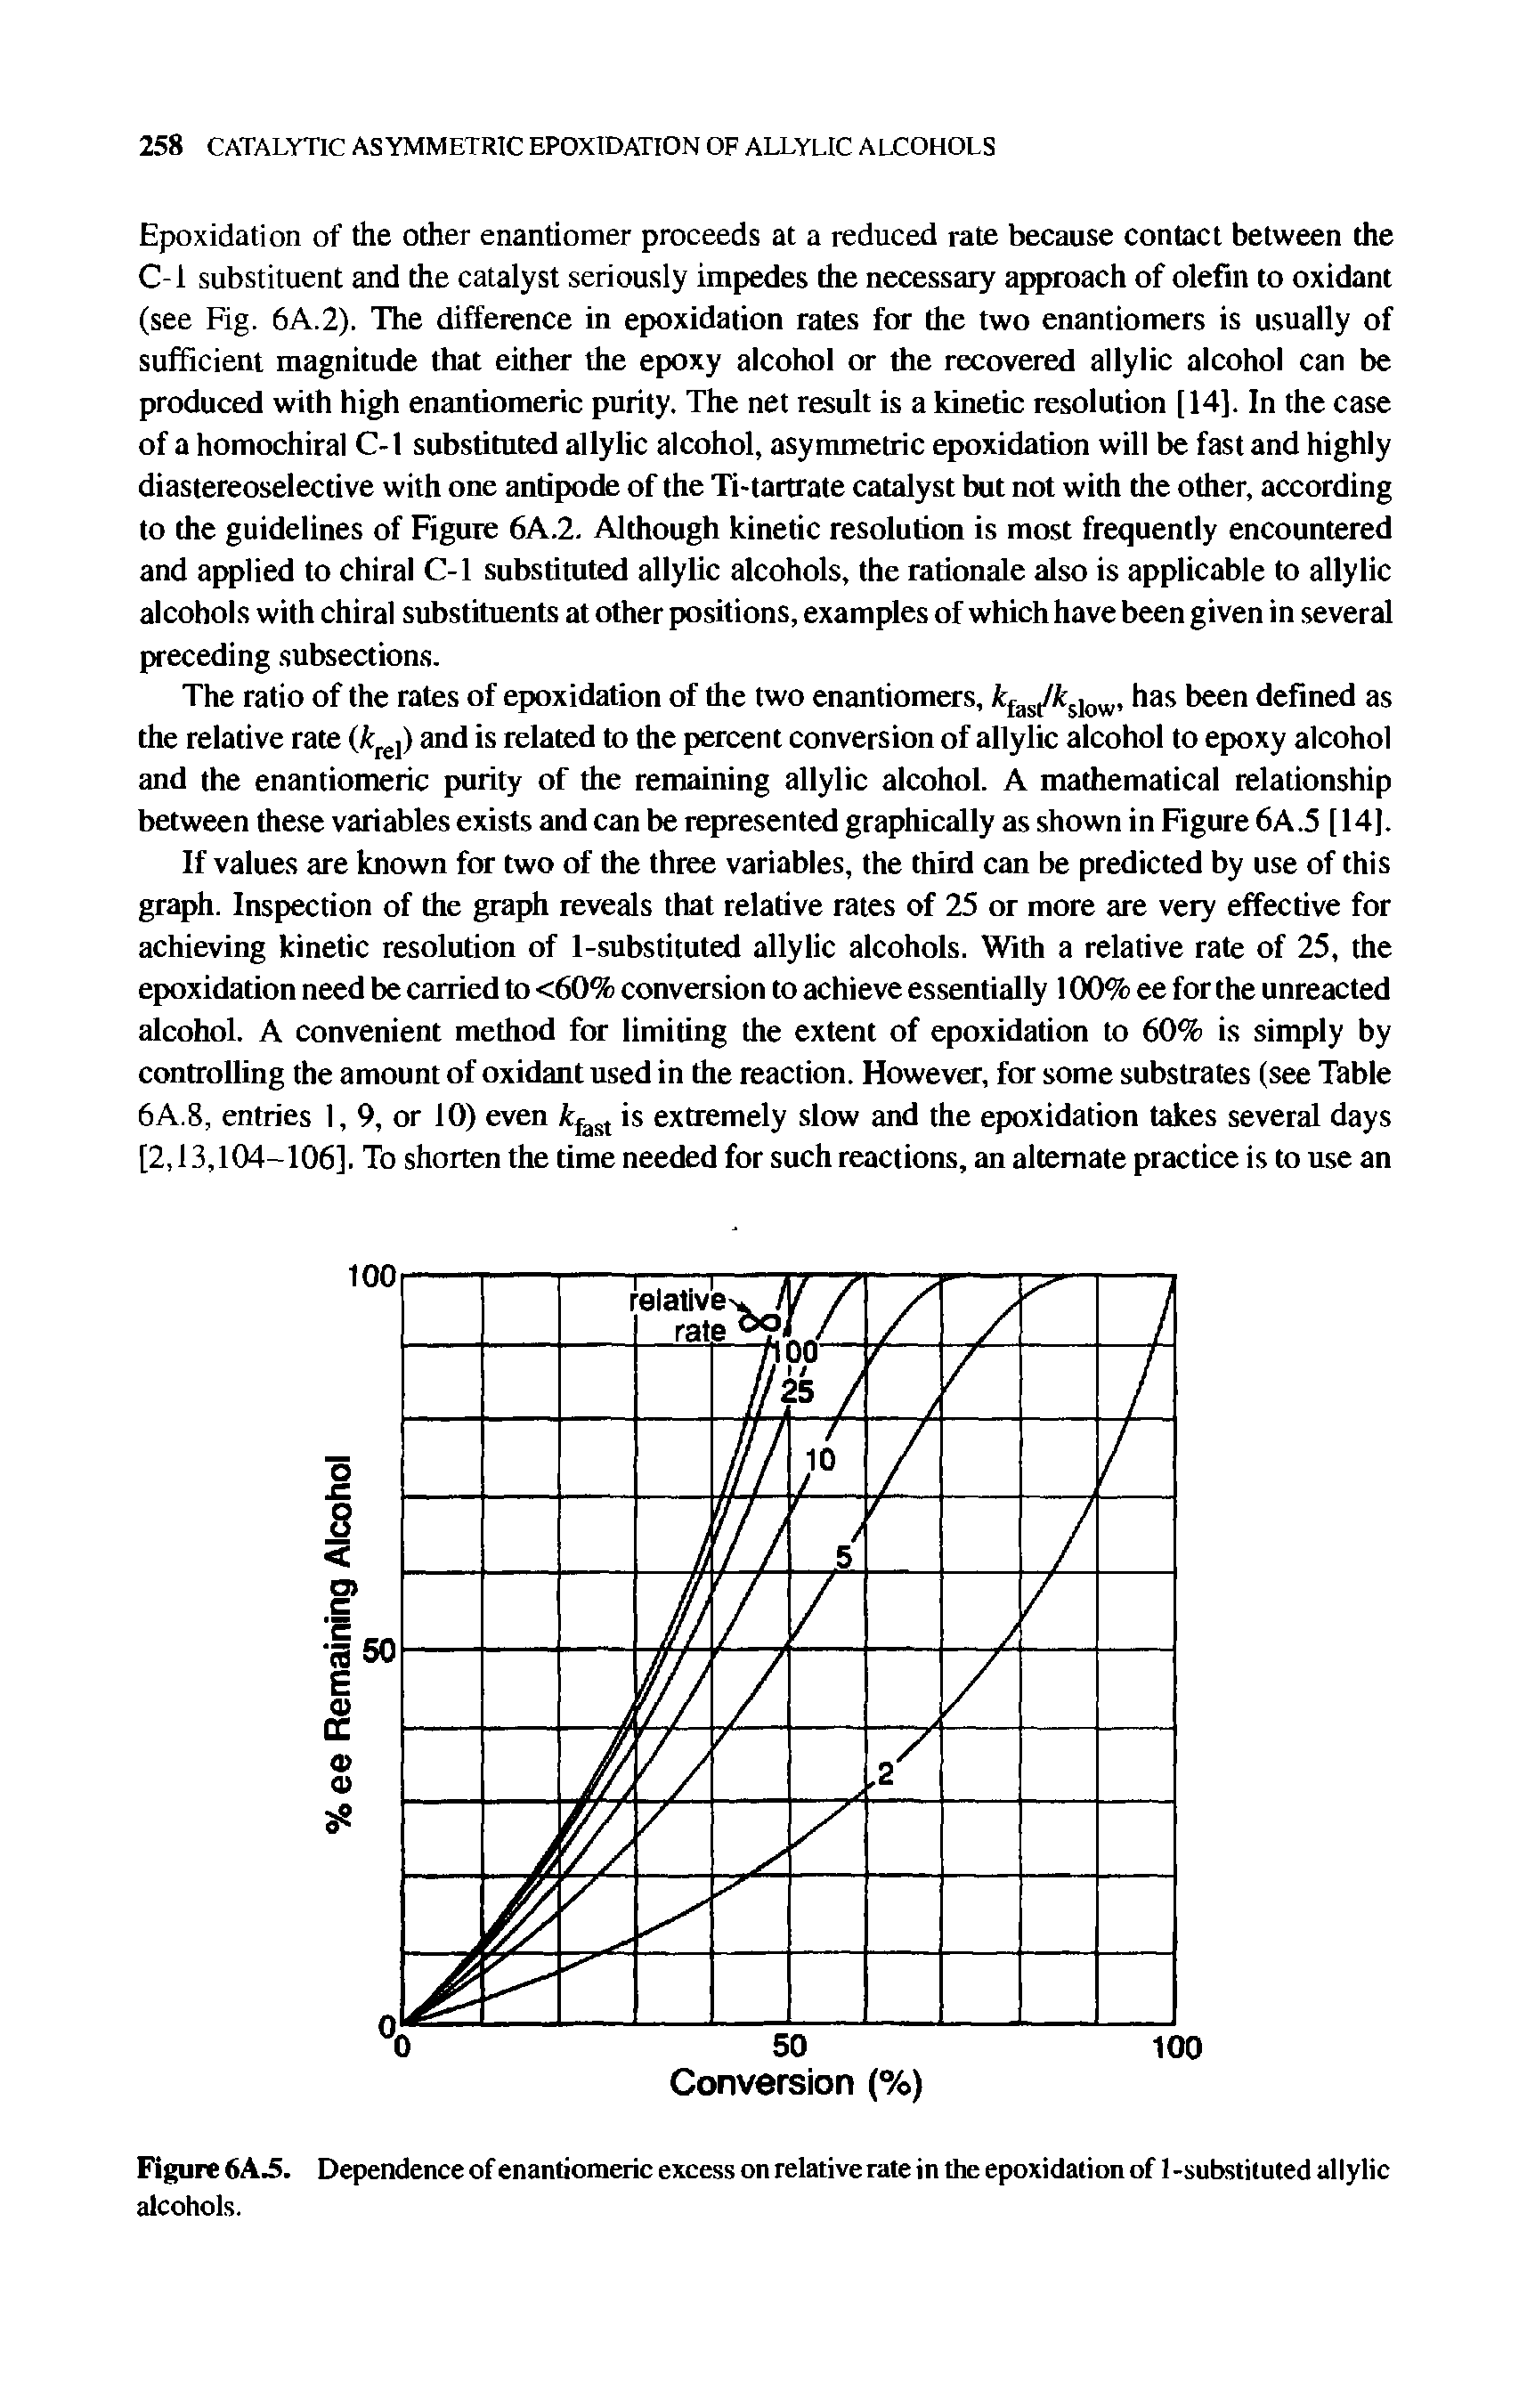 Figure 6AJ5. Dependence of enantiomeric excess on relative rate in the epoxidation of 1 -substituted allylic alcohols.